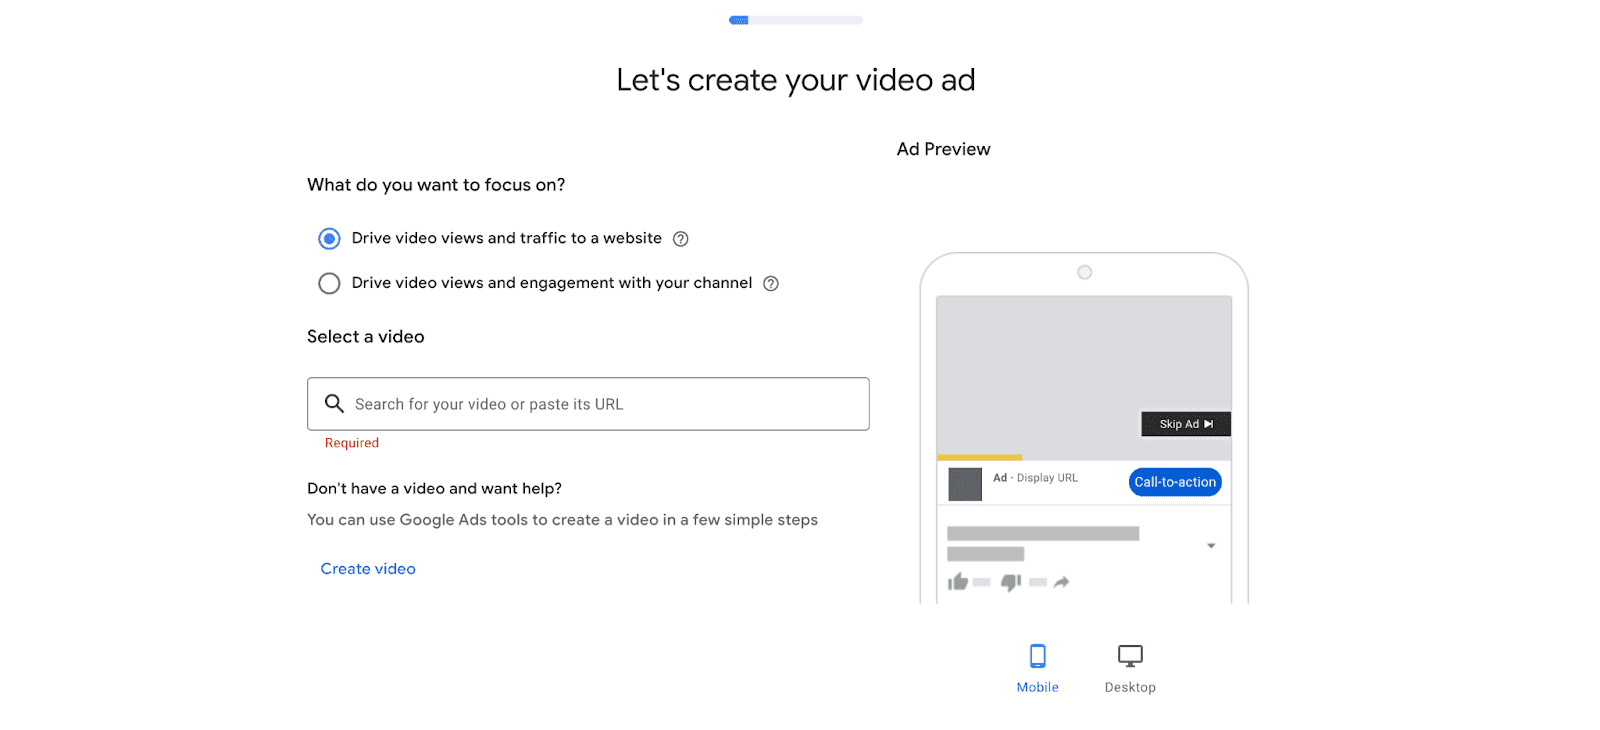 Google ad page lets create a video